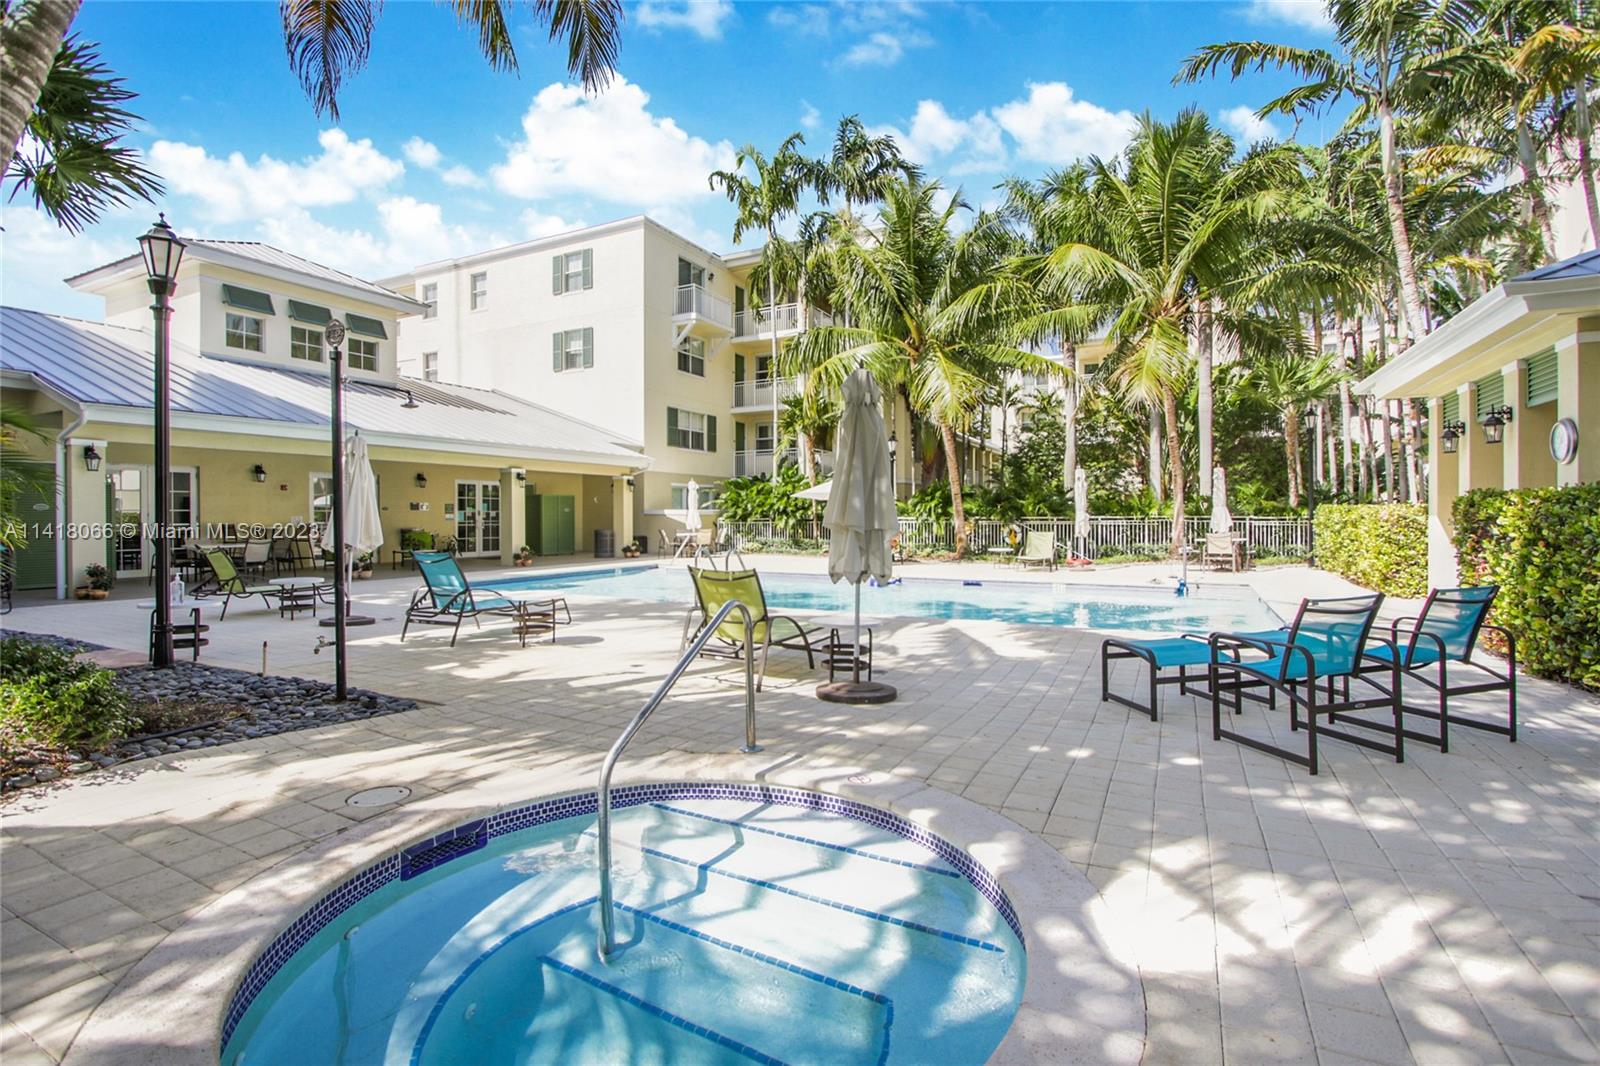 Largest 2,226 sq. ft. unit at The Reserve of Pinecrest, Key West style gated community consisting of only 68 units. First floor 4BD/3.5BA 2 story townhouse style unit w/one bedroom on the first floor. Beautiful kitchen w/granite counters, cherry wood cabinets, laundry room, pantry & storage closets. Second-floor Primary bedroom suite w/two walk-in closets, separate shower & spa tub. Two private balconies & covered patio. Impact glass. Heated pool, jacuzzi, clubhouse & gym. Parking garage w/elevators. Pinecrest Elementary.